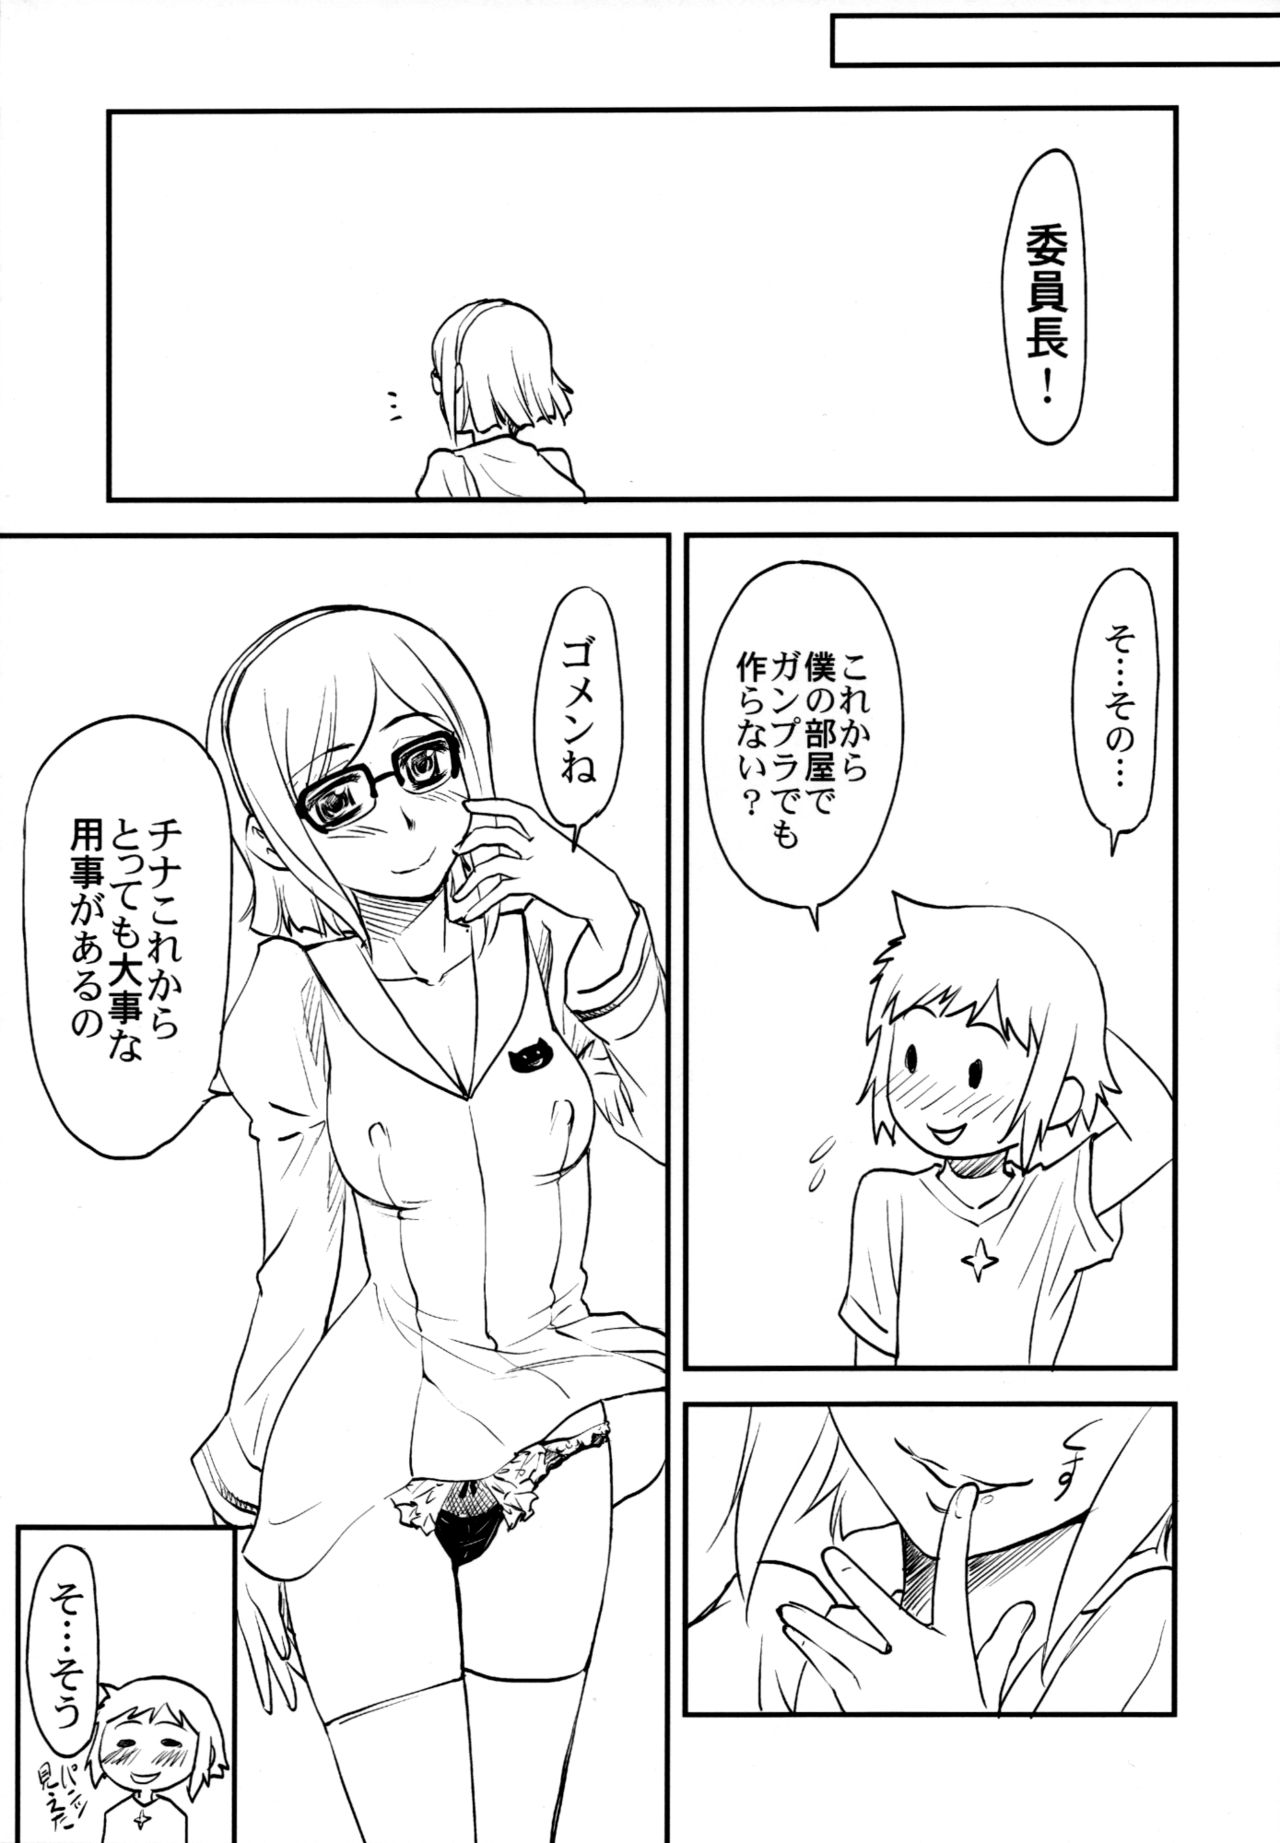 (C86) [Leaf Party (Byakurou, Nagare Ippon)] Ral no Emono (Gundam Build Fighters) page 18 full